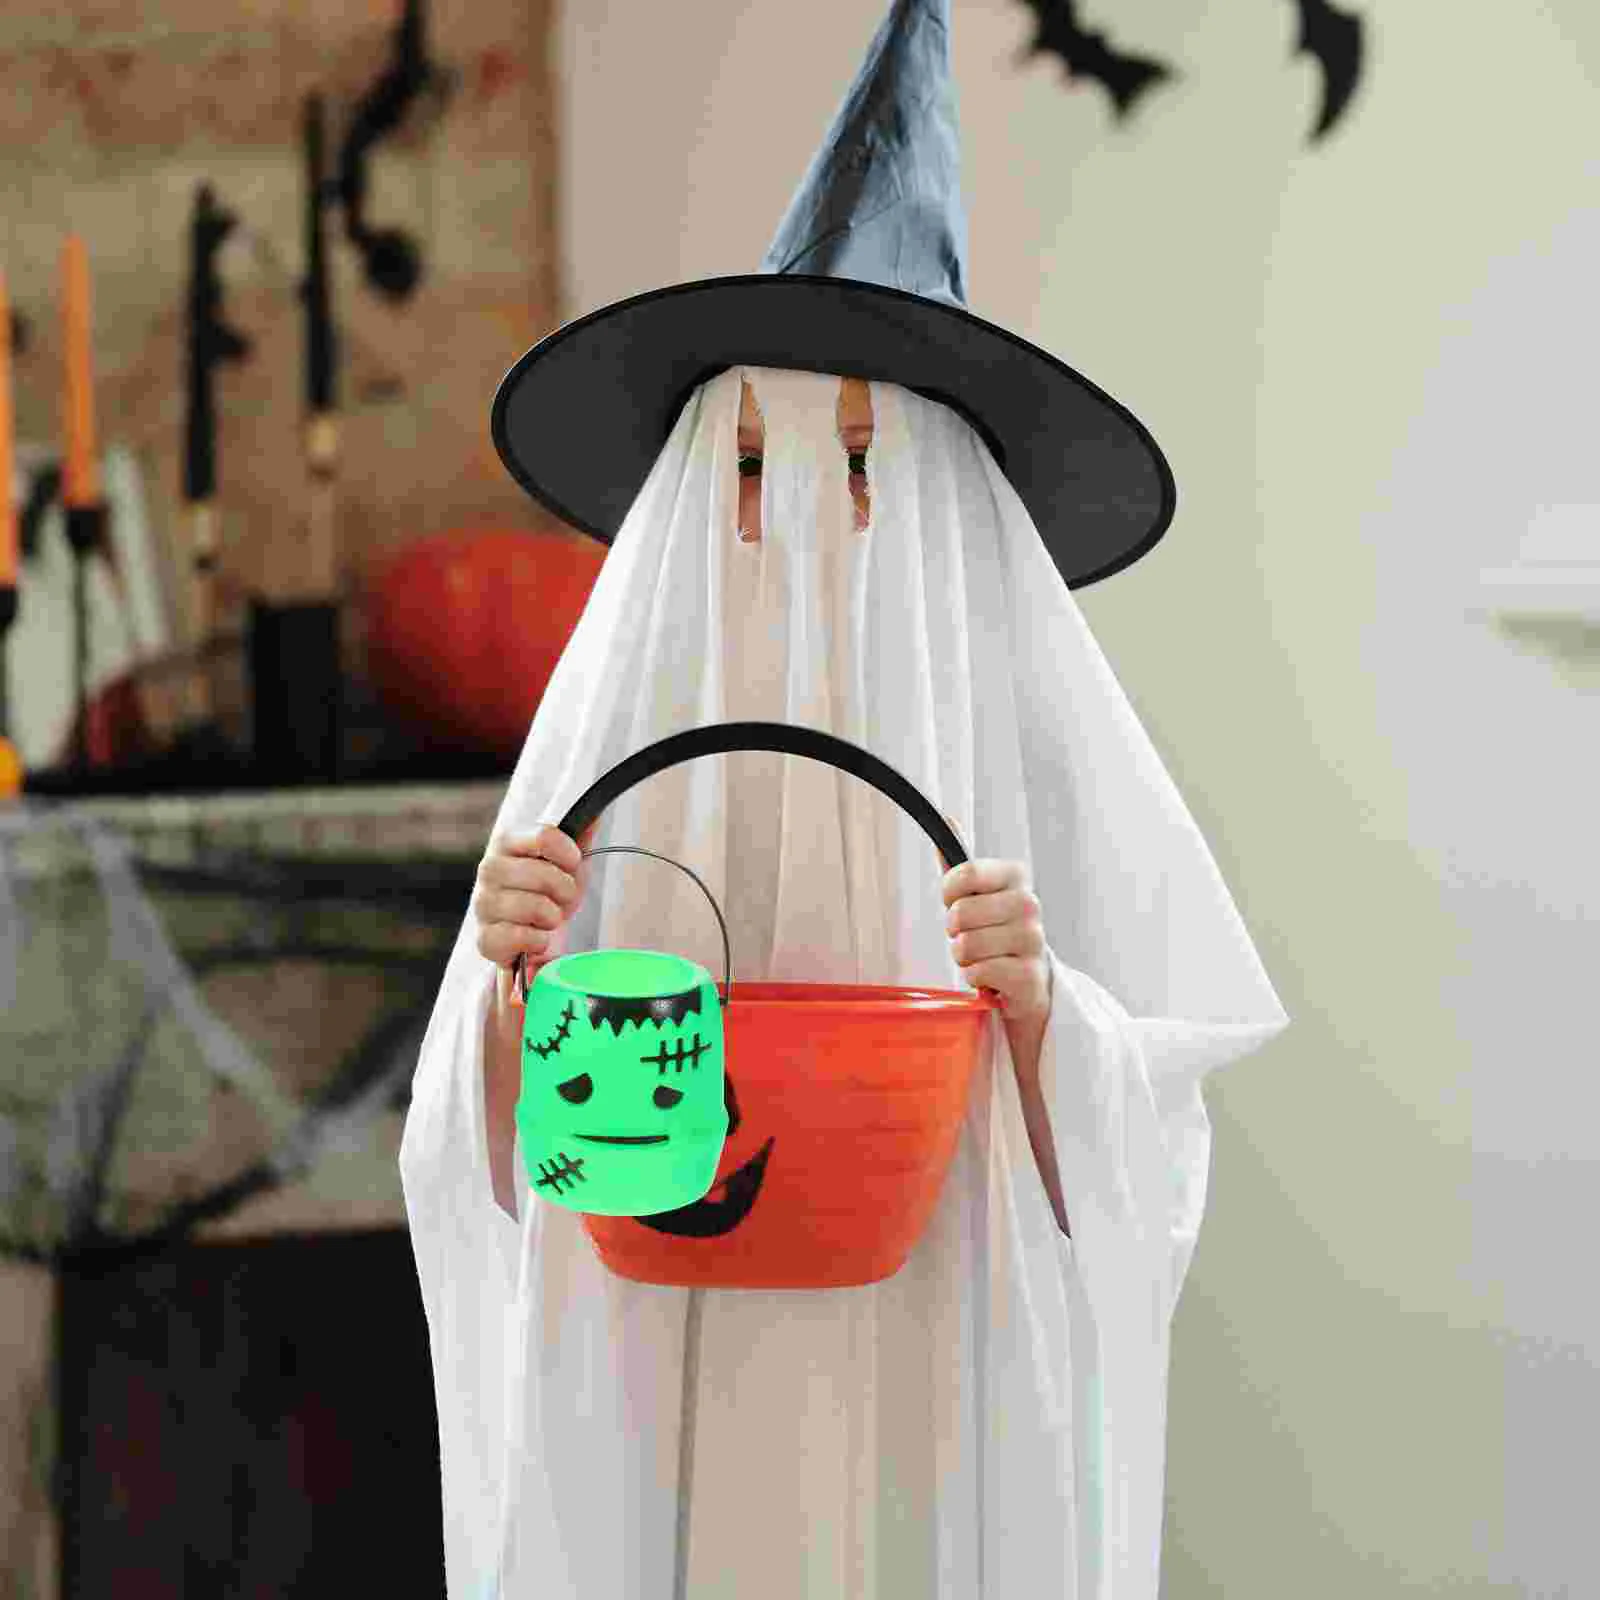 

Halloween Candy Buckets Portable Trick Or Treat Pumpkin Ghost Skull Pail Holder With Handle Party Decoration Buckets